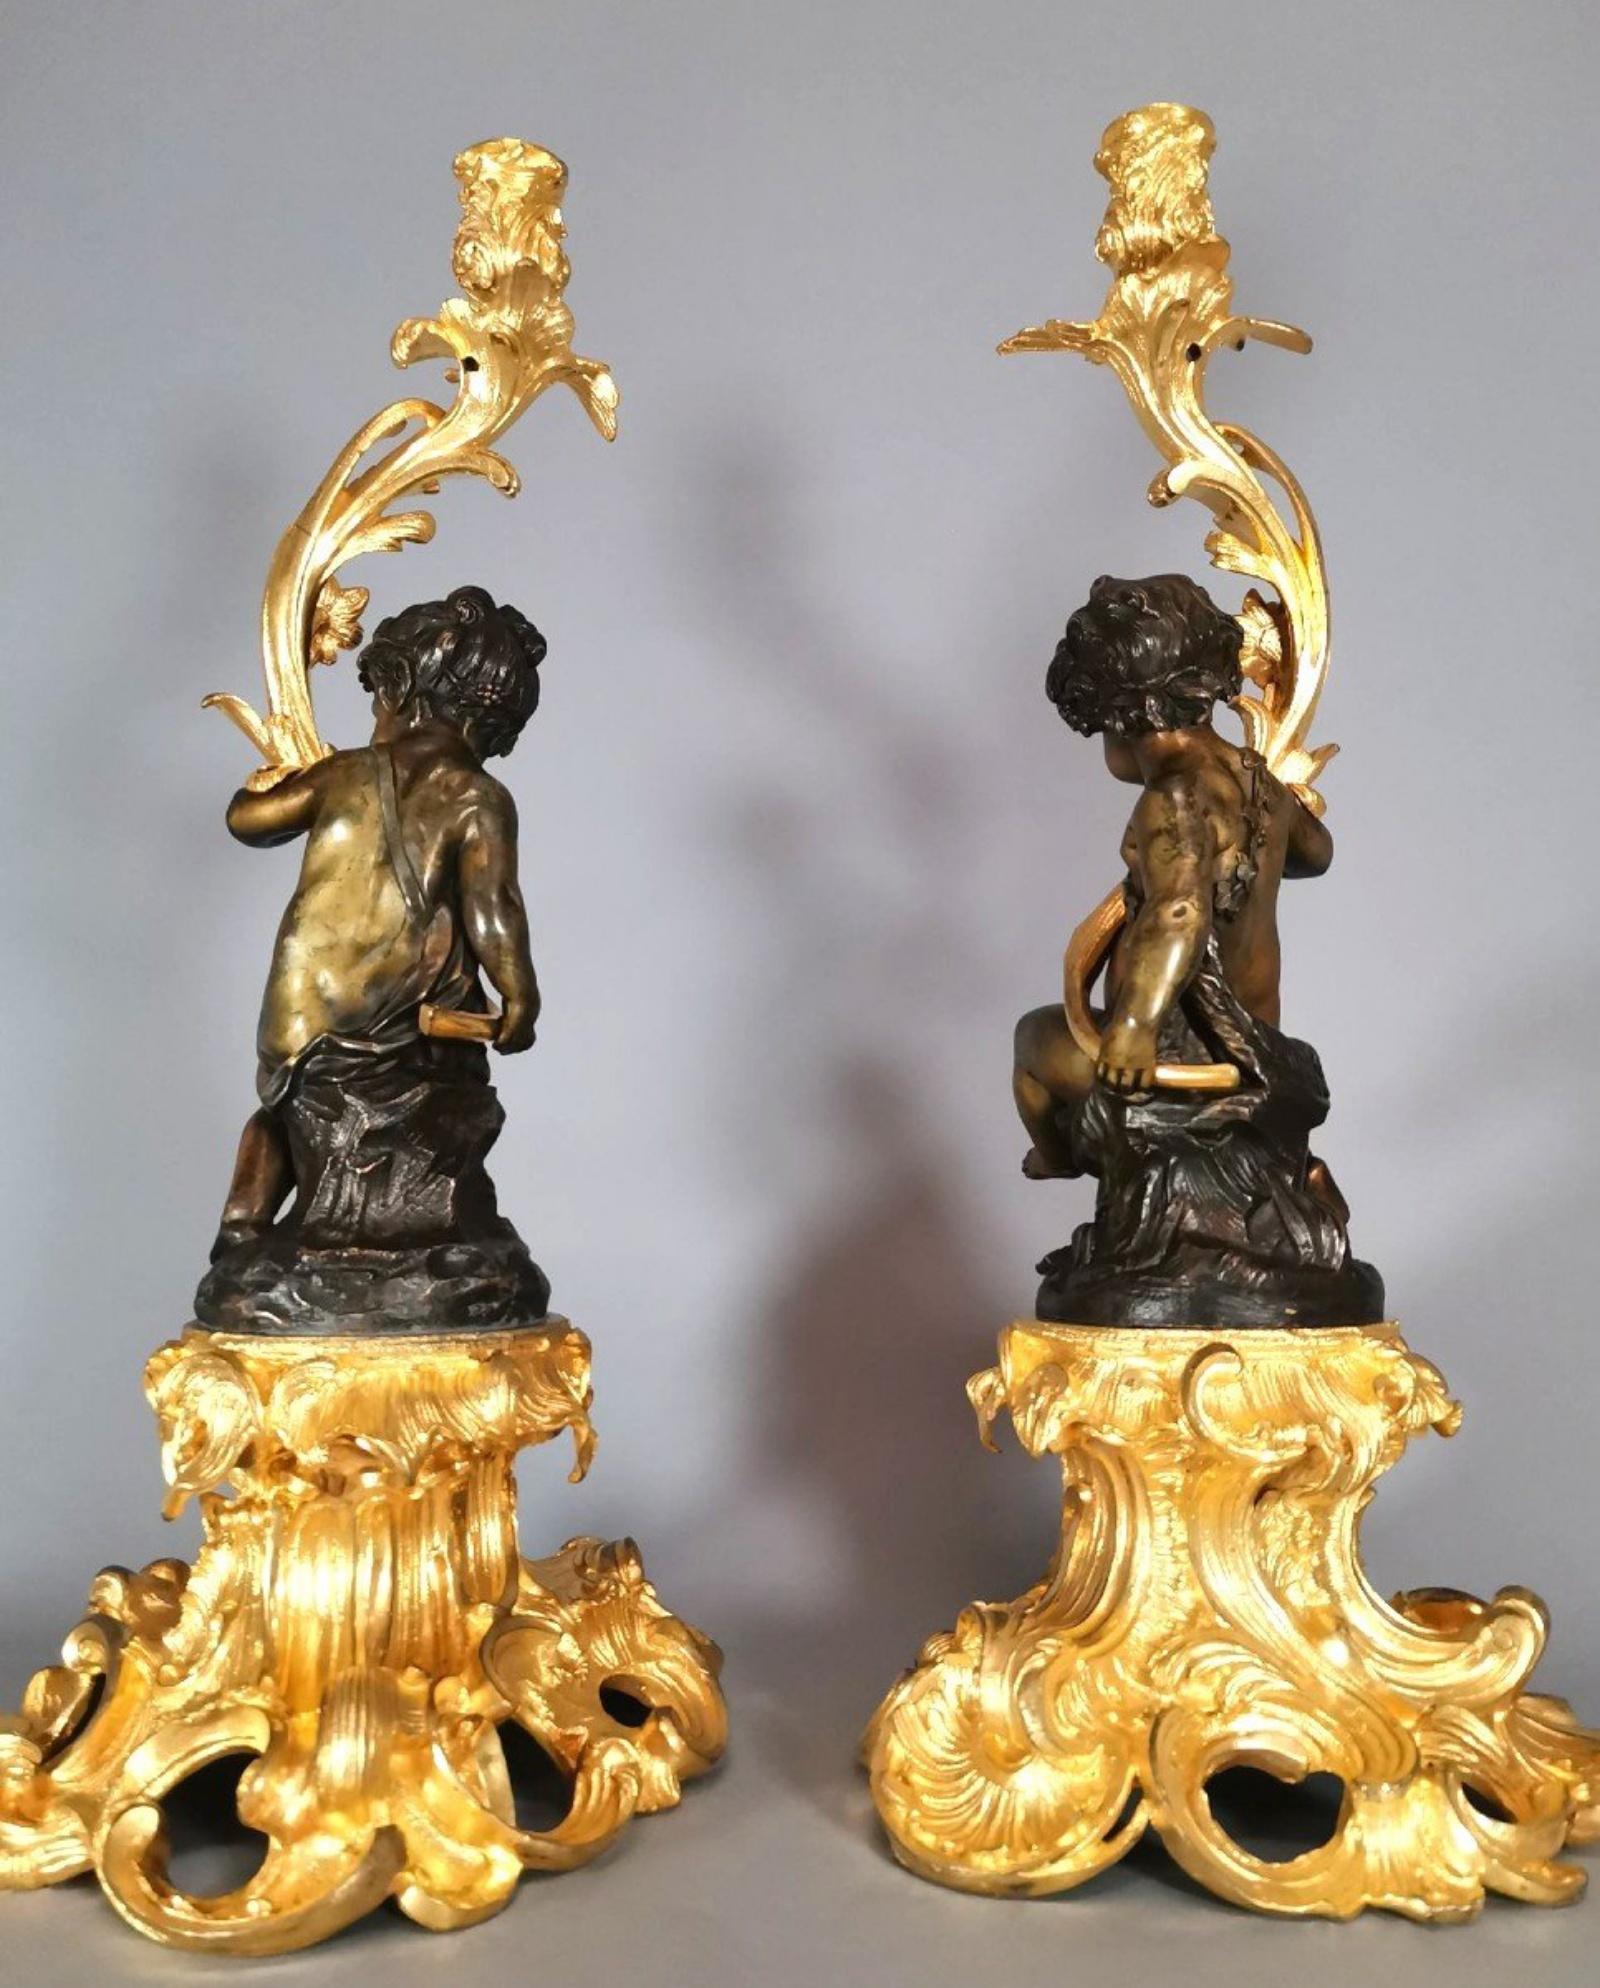 Bronze Pair of Candelabra with Putti by Clodion after Claude Michael, 18th Century